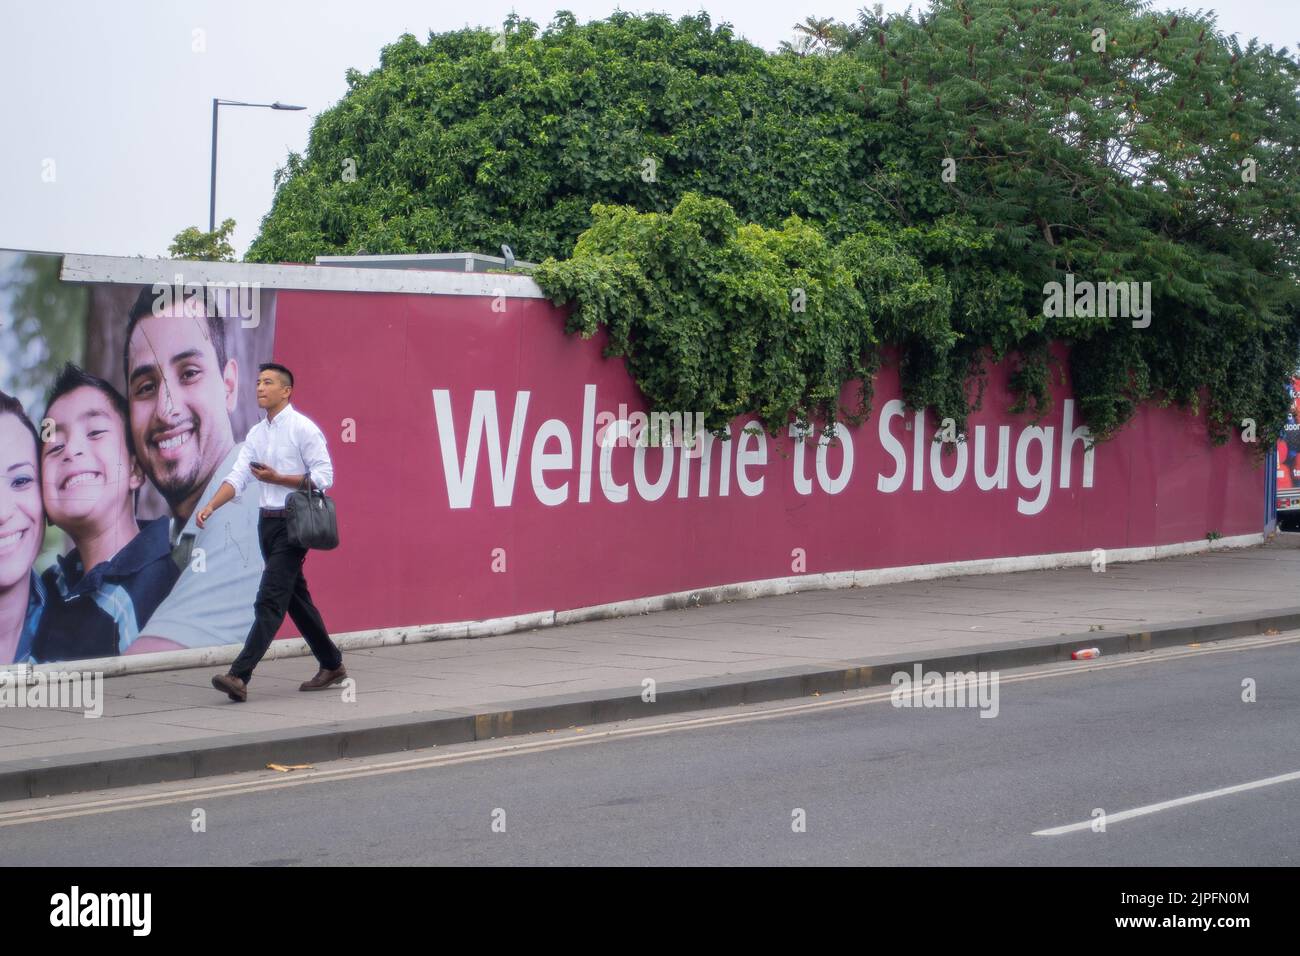 Slough, Berkshire, UK. 17th August, 2022. The morning commute in Slough is so much quieter post Covid-19 as many people have not returned to working in offices and instead work from home most days or permanently. Credit: Maureen McLean/Alamy Stock Photo